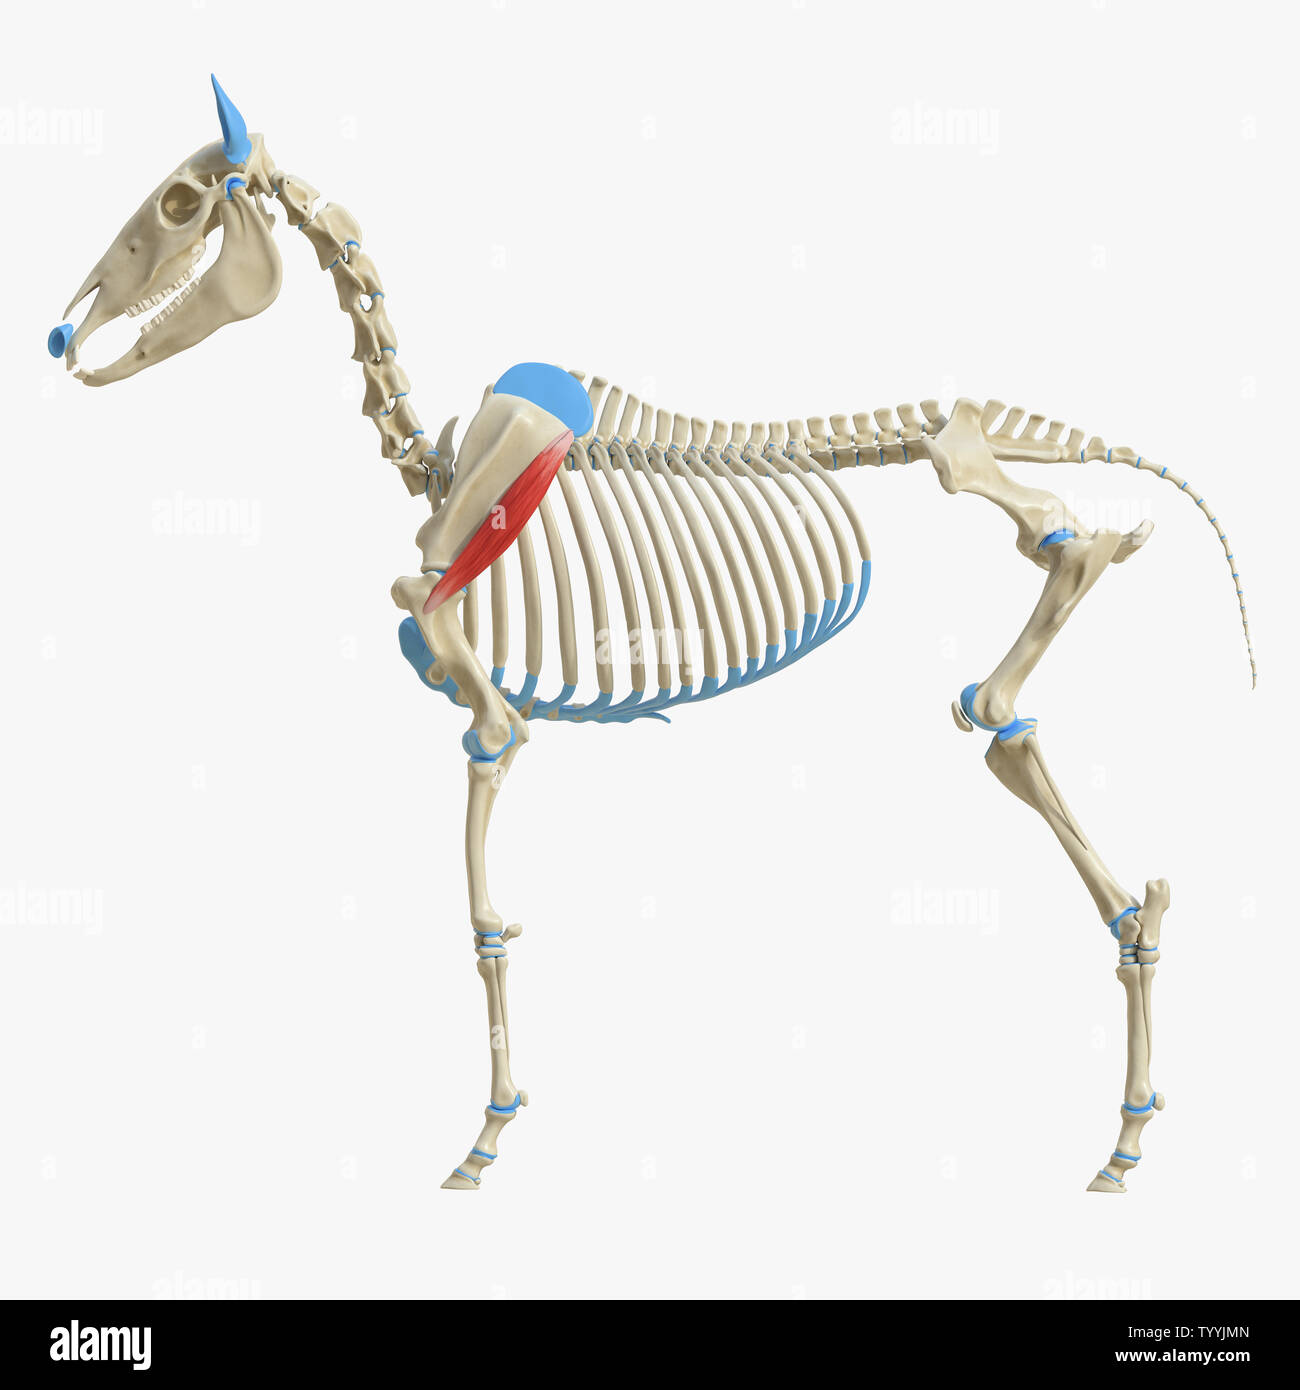 3d rendered medically accurate illustration of the equine muscle anatomy - Deltoideus Stock Photo